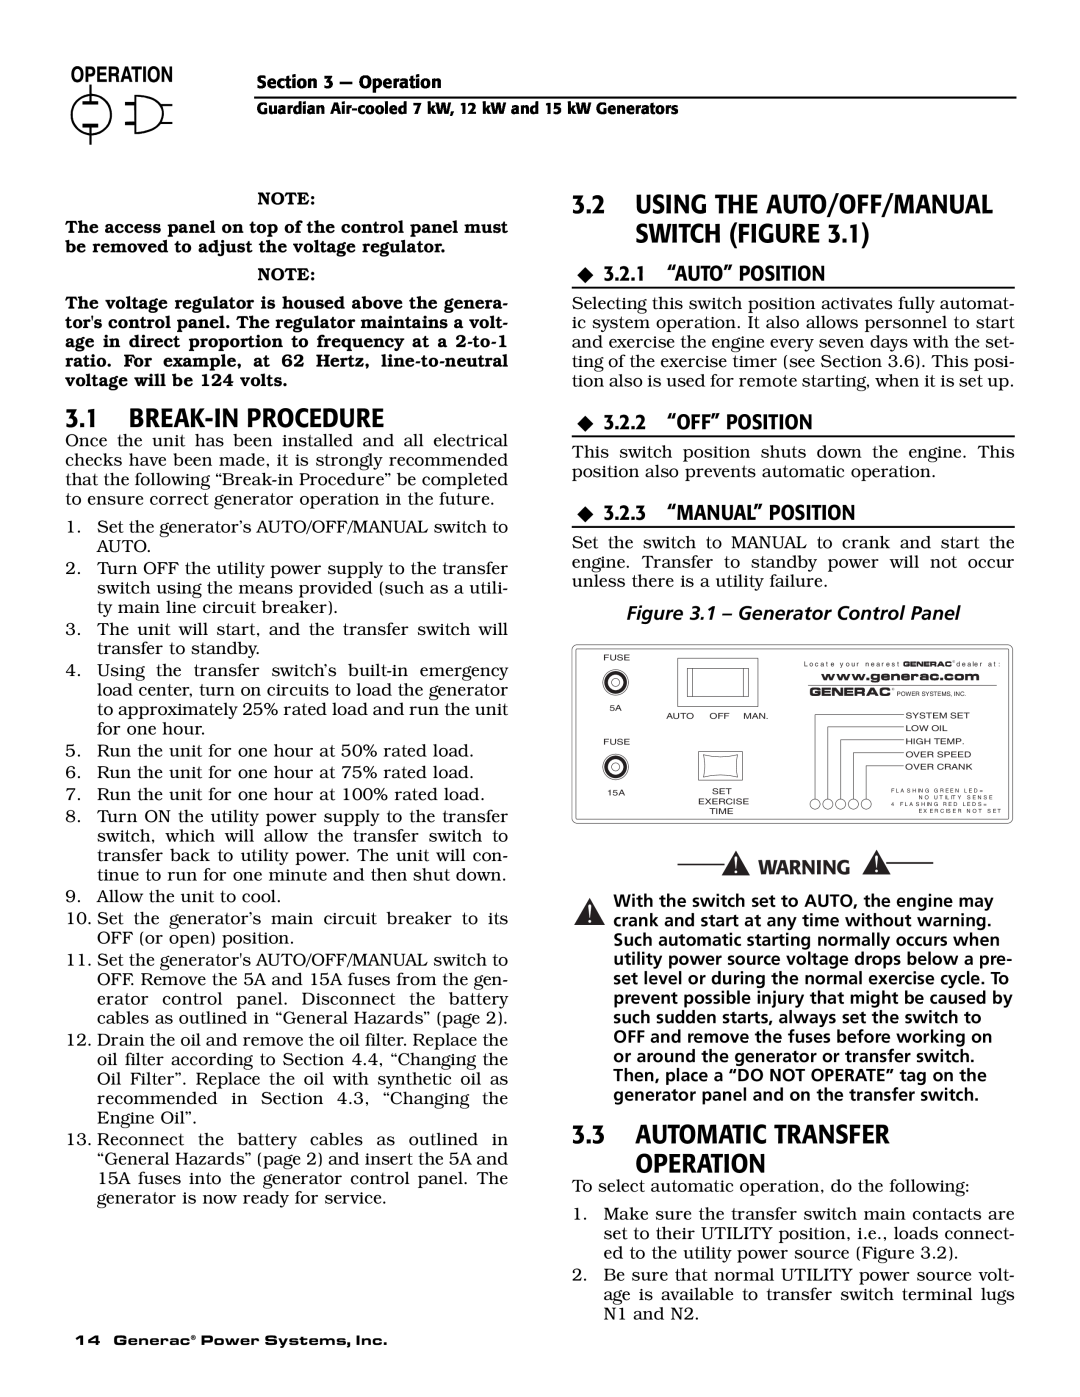 Guardian Technologies 04456-2 Break-In Procedure, Automatic Transfer Operation, Using The Auto/Off/Manual Switch Figure 